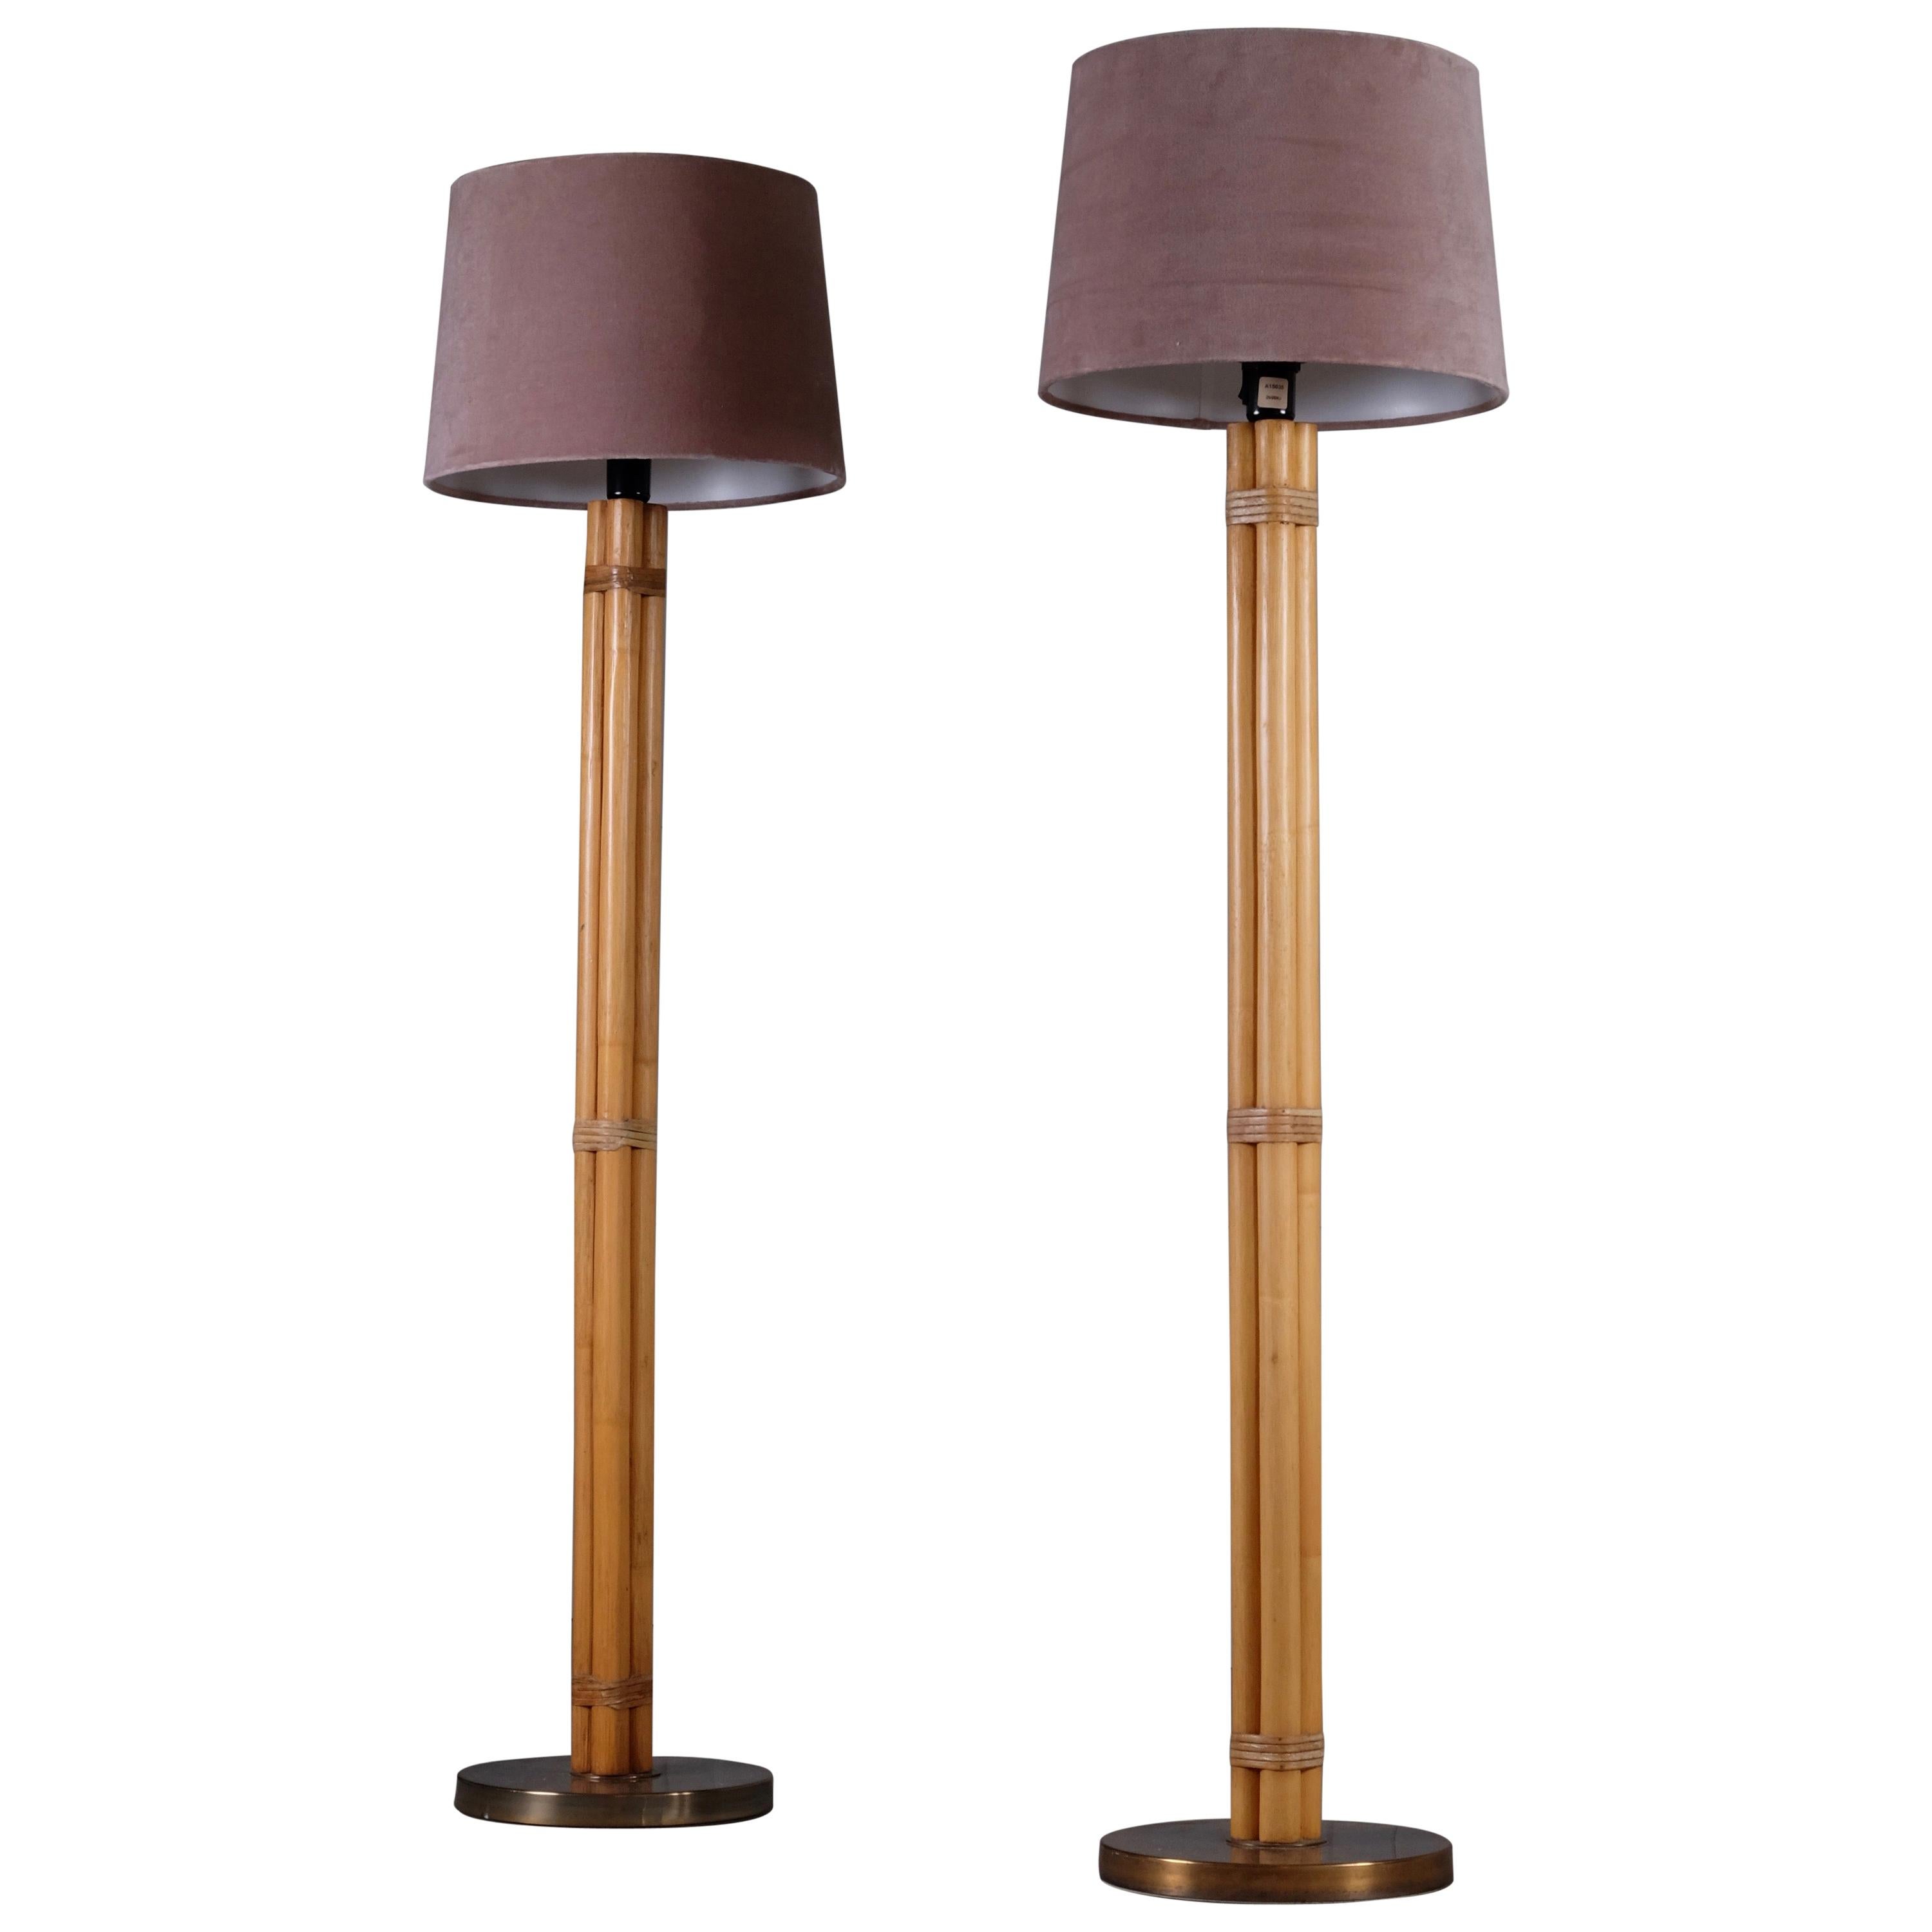 Pair of Swedish Brass and Bamboo Floor Lamps by Bergboms, 1970s For Sale